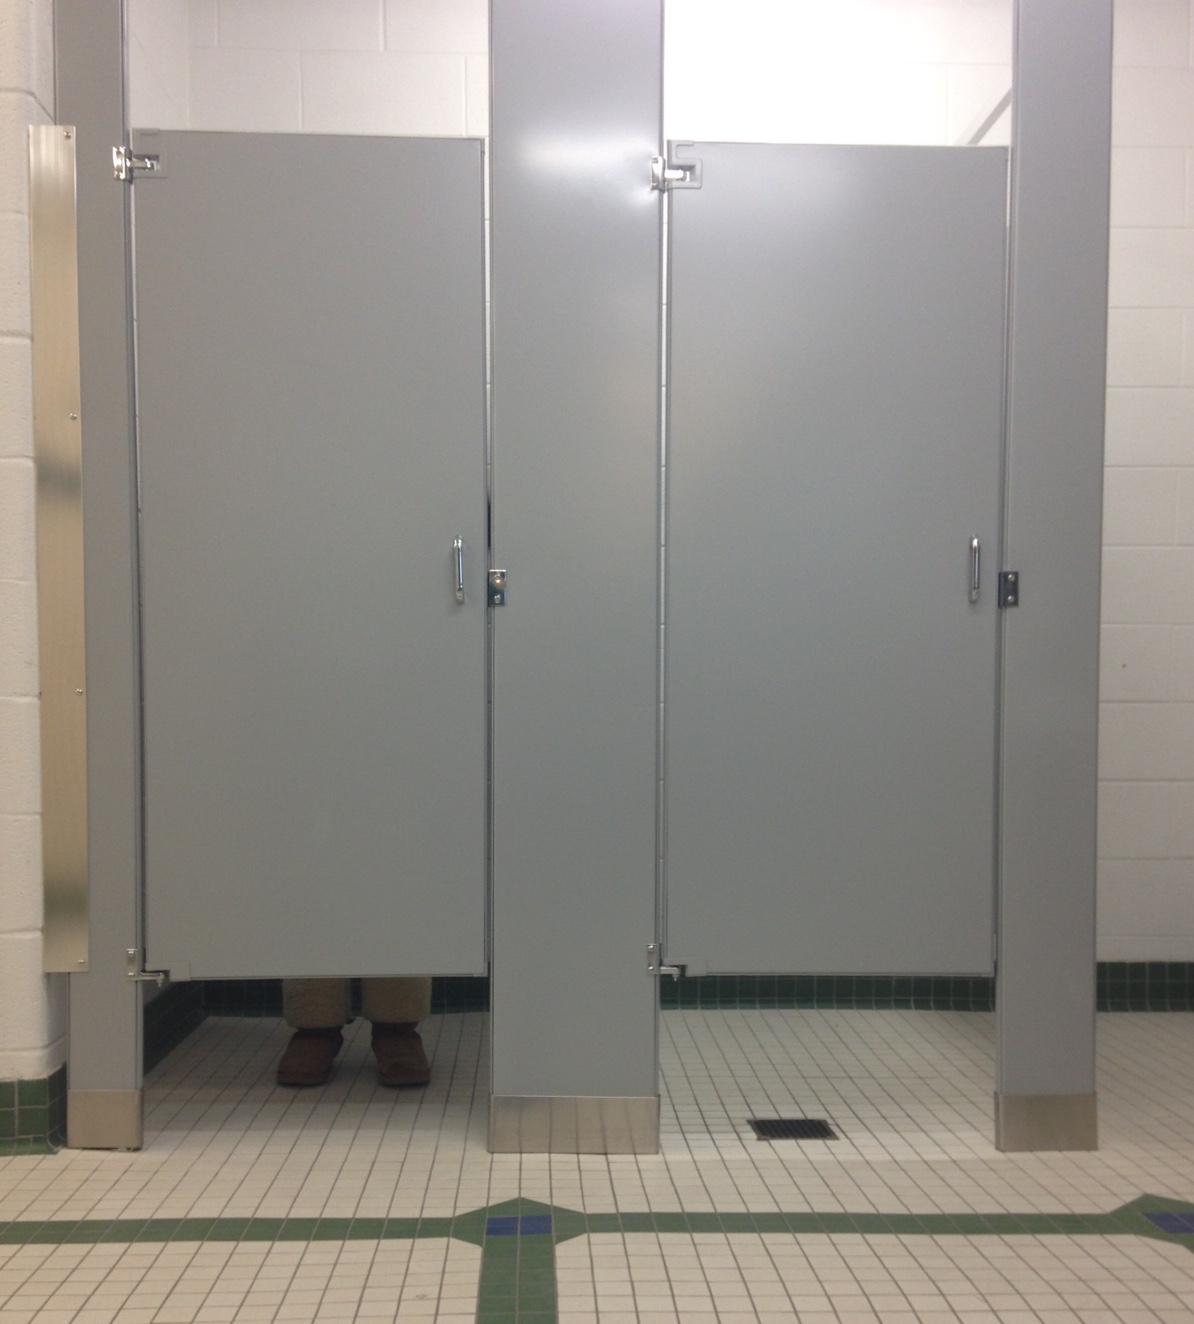 Private changing stalls added to locker rooms – The Scratching Post